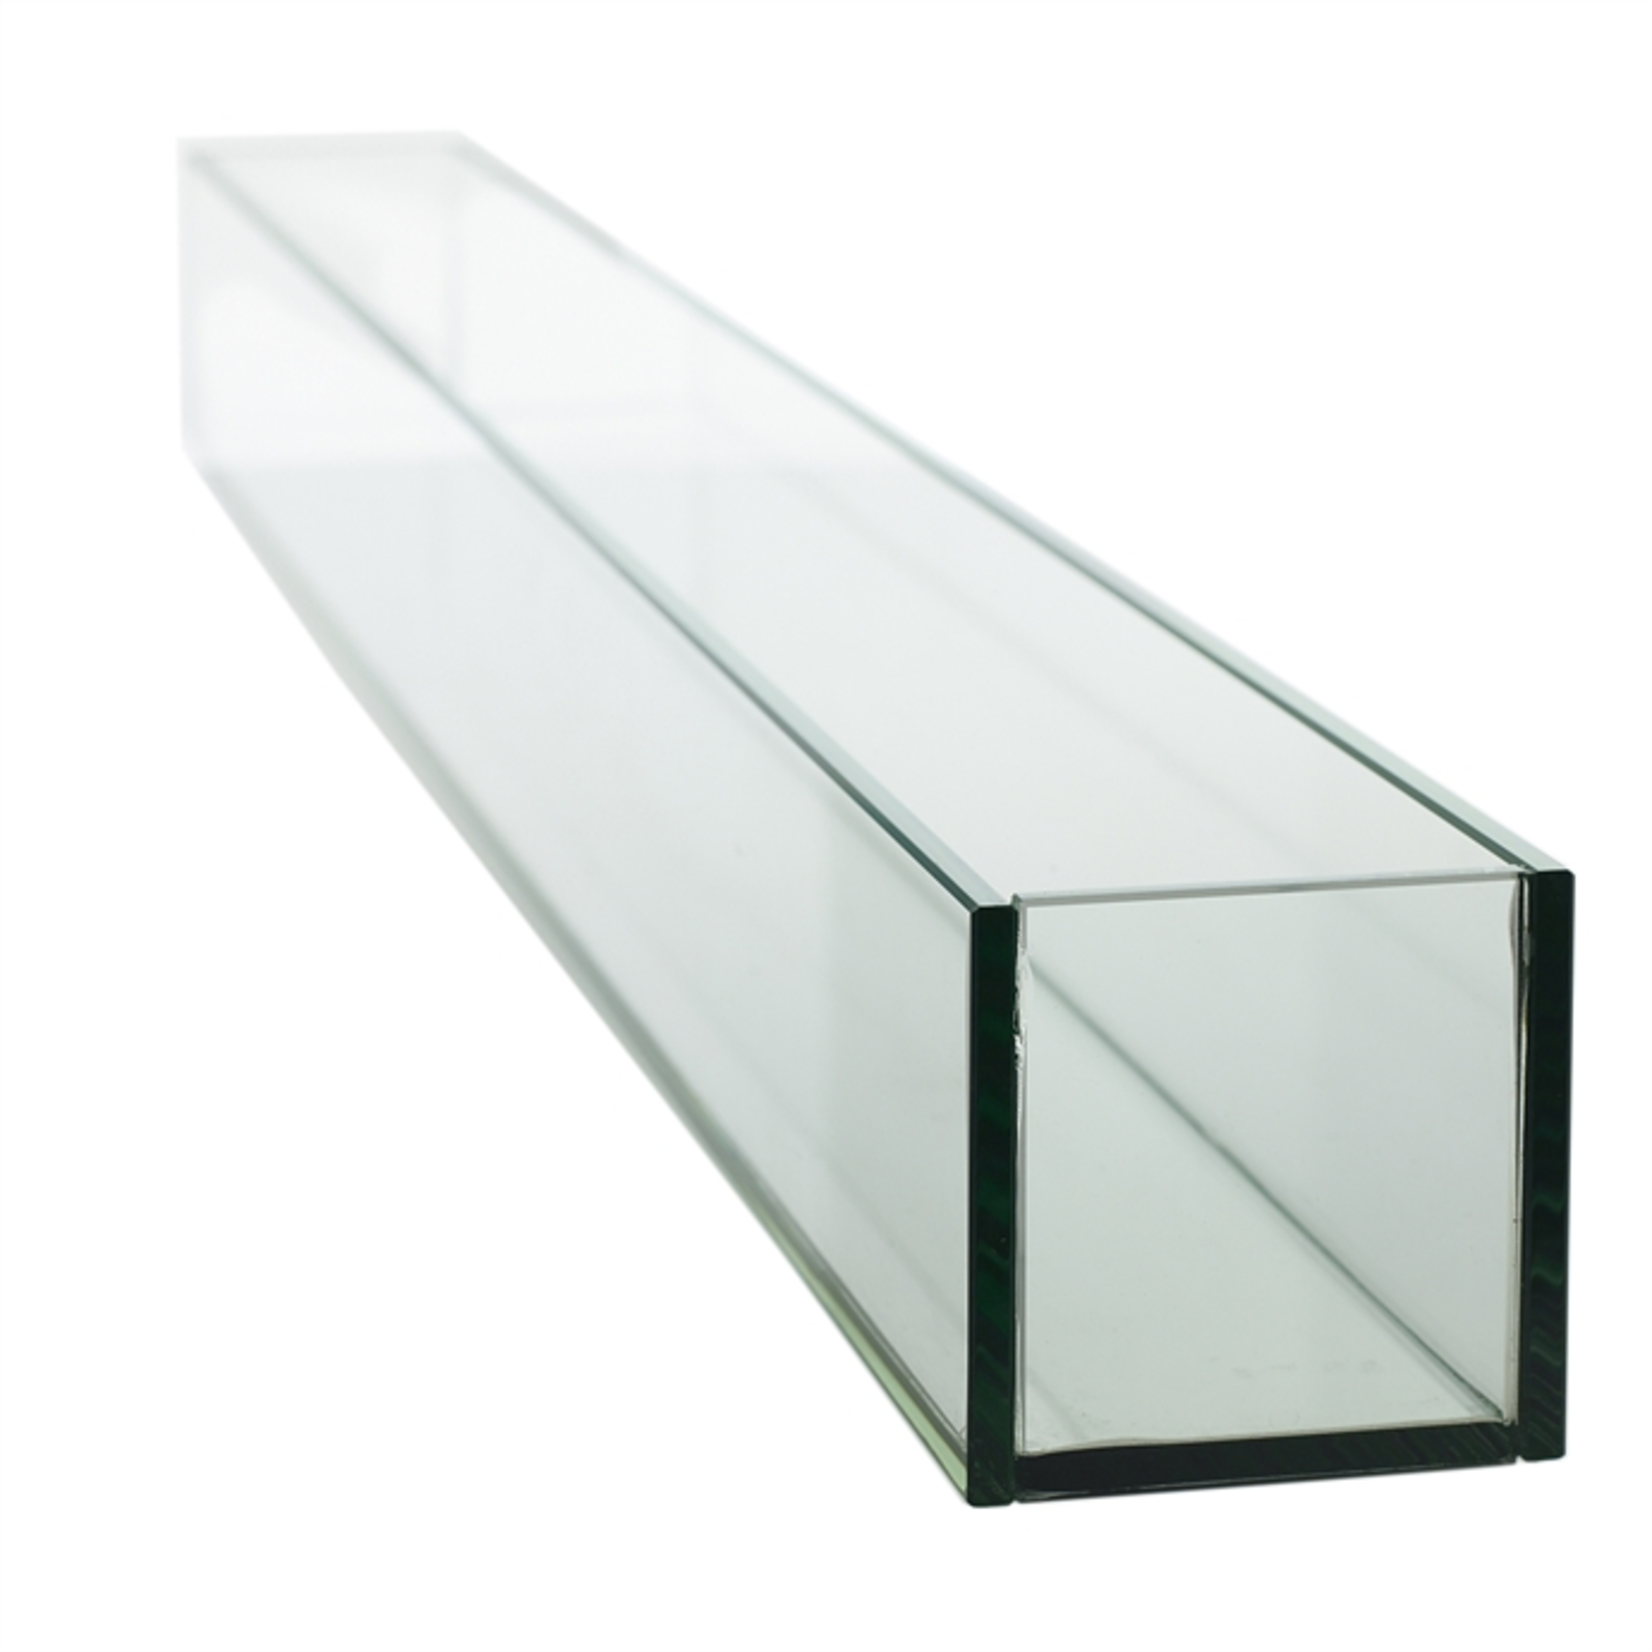 47”L X 4” X 4” LOW RECTANGLE PLATE GLASS (AD)